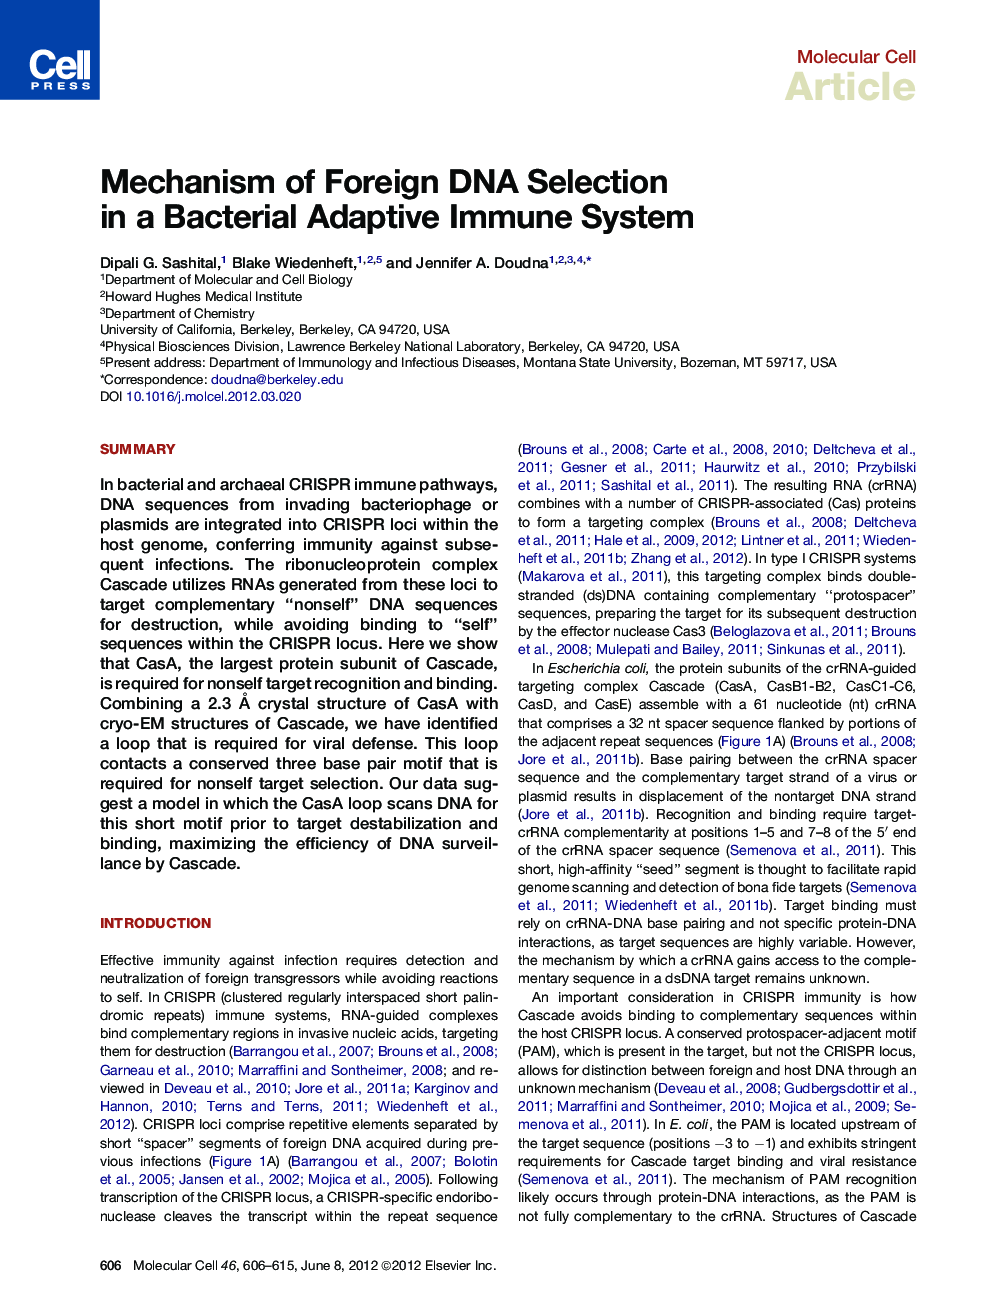 Mechanism of Foreign DNA Selection in a Bacterial Adaptive Immune System